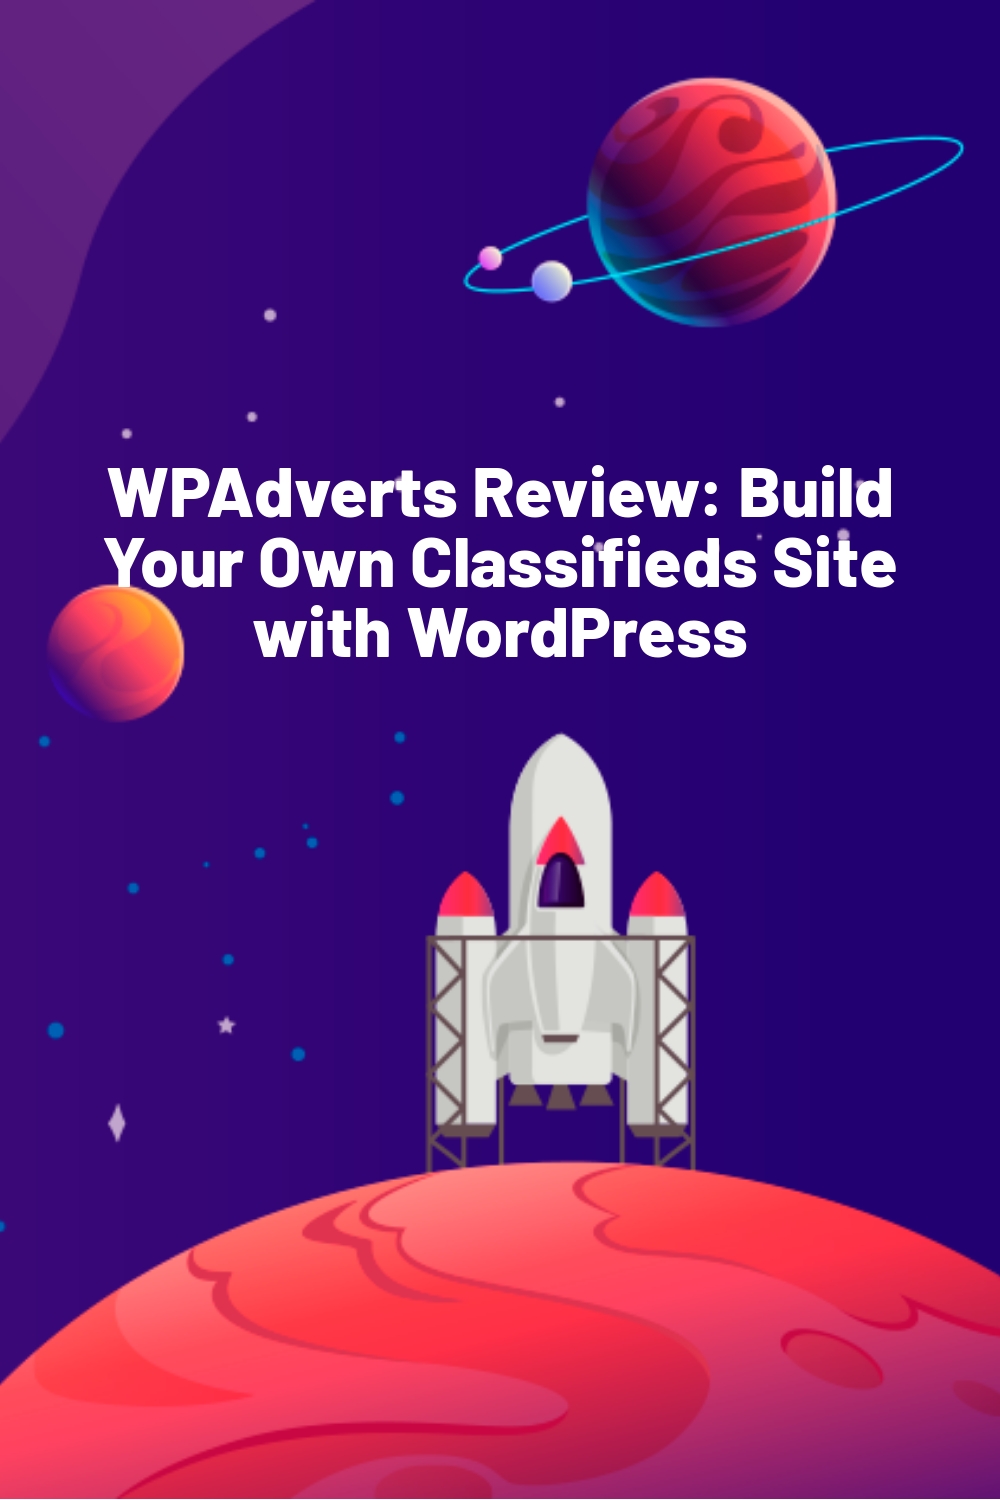 WPAdverts Review: Build Your Own Classifieds Site with WordPress